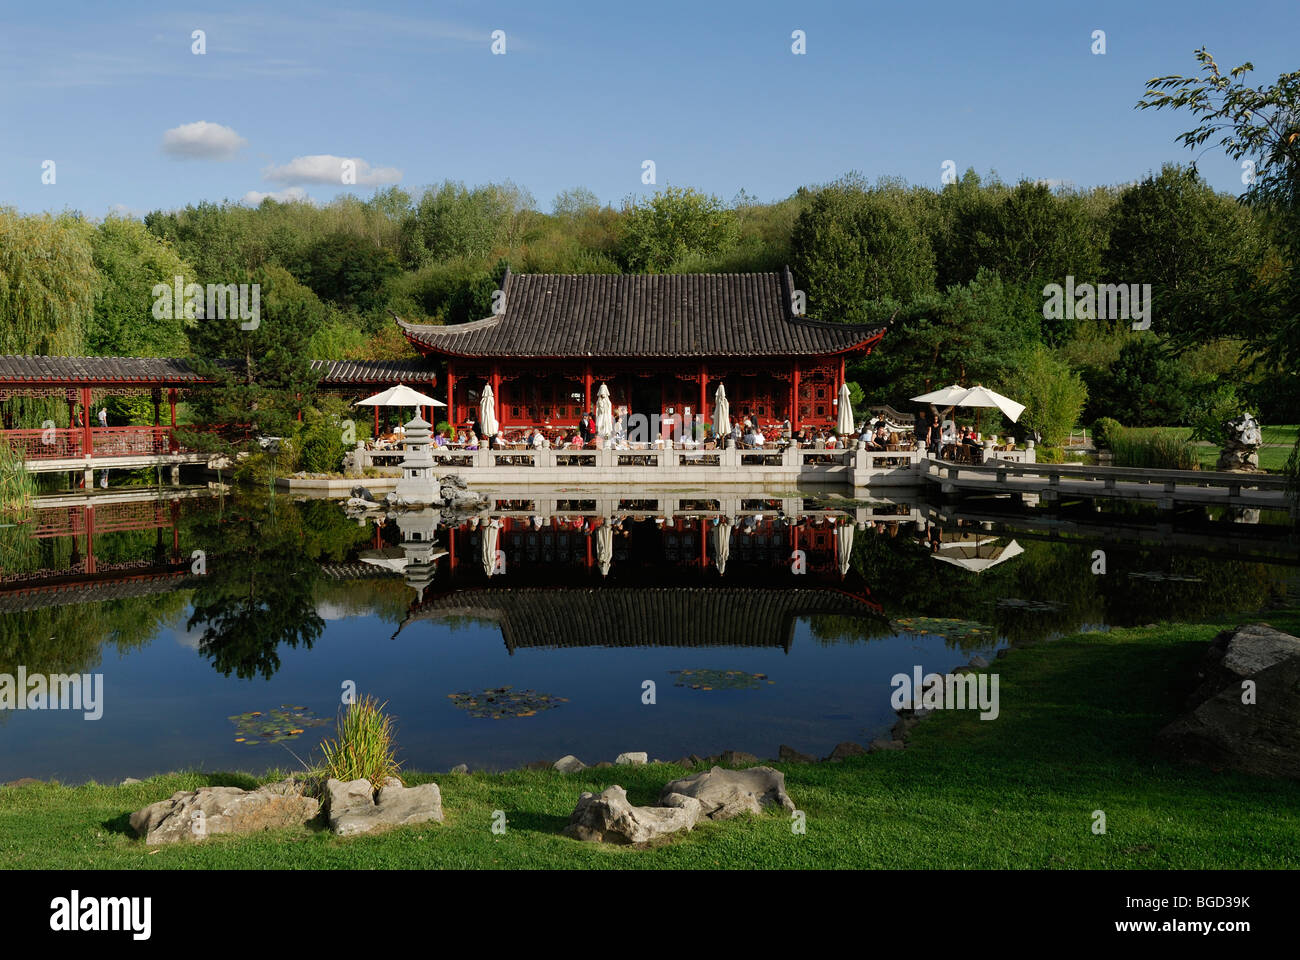 Berlin. Germany. Chinese Pavilion and Tea Room at the Gardens of the World (Garten der Welt) Recreation Park in Marzahn. Stock Photo